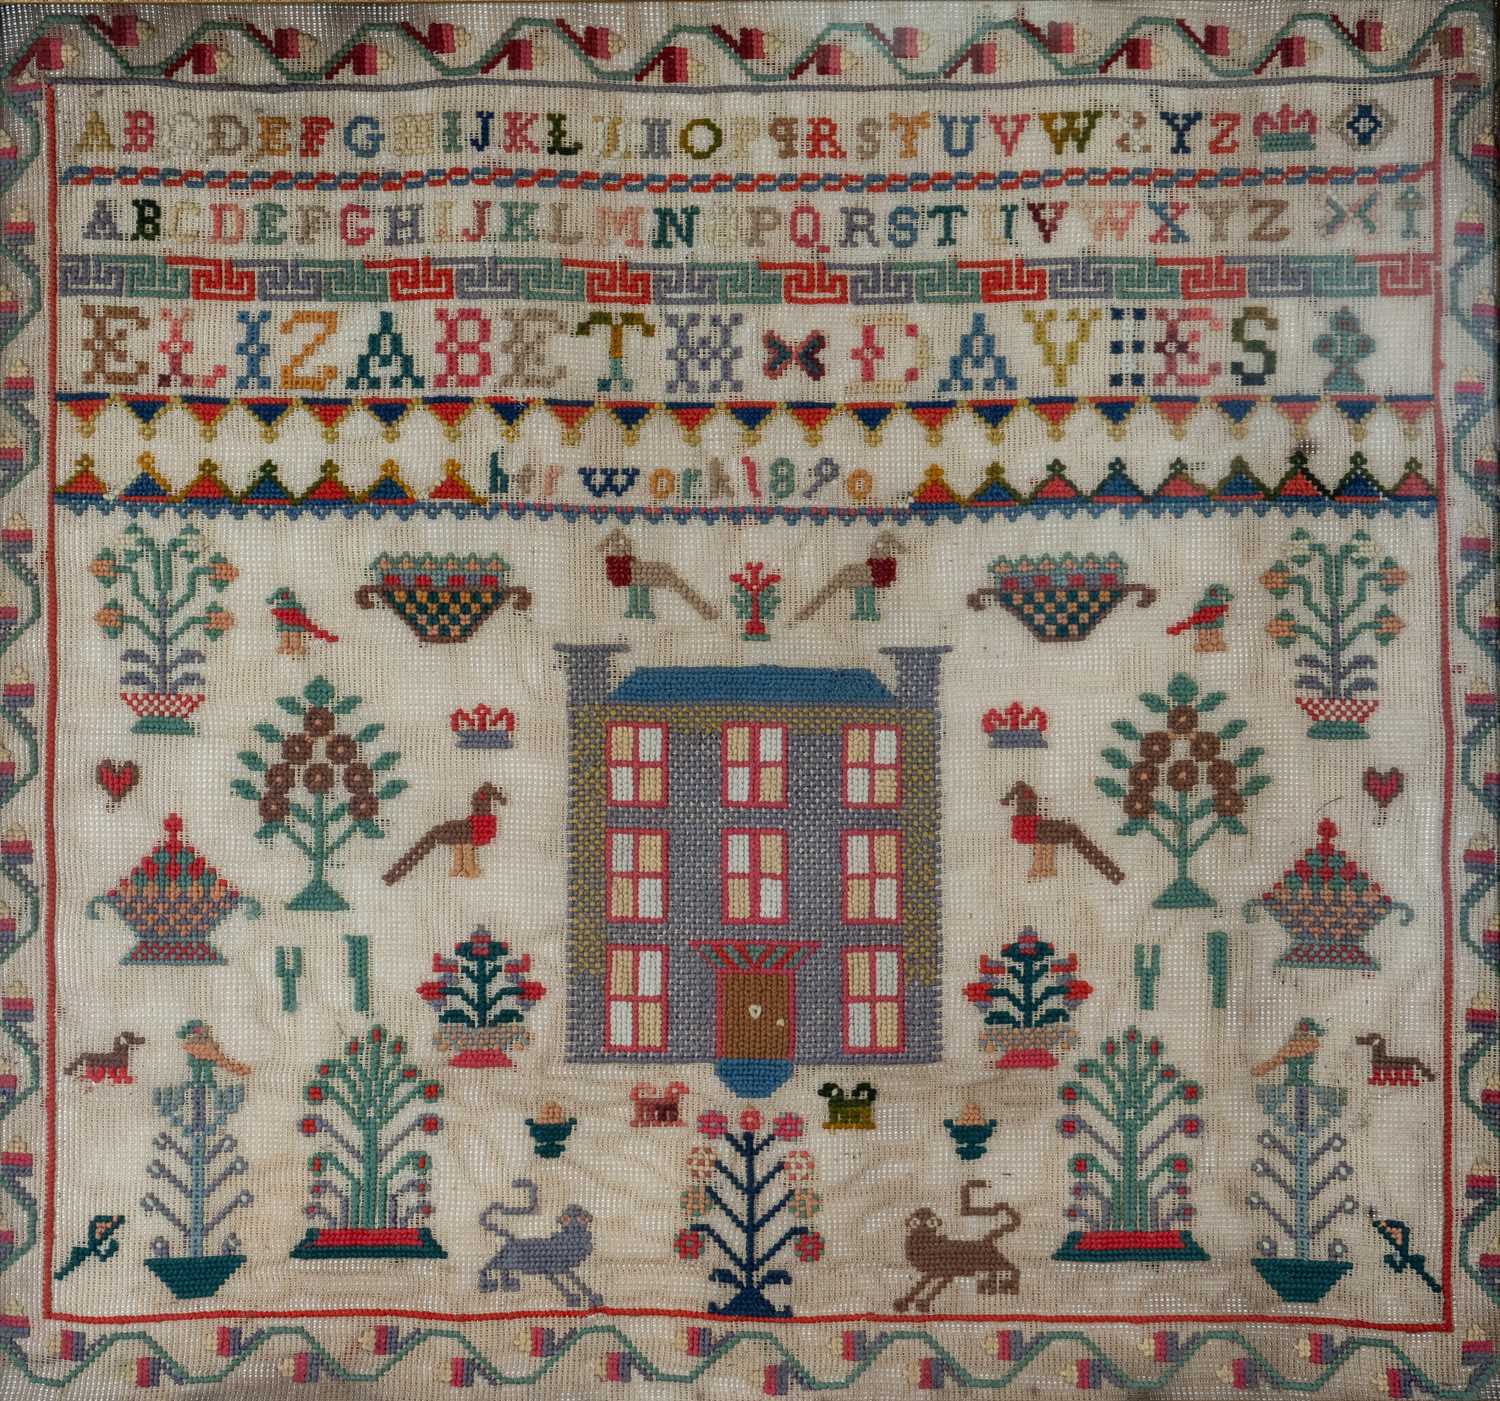 VICTORIAN WOOLWORK SAMPLER, dated 1890, very well and profusely worked in different colours by